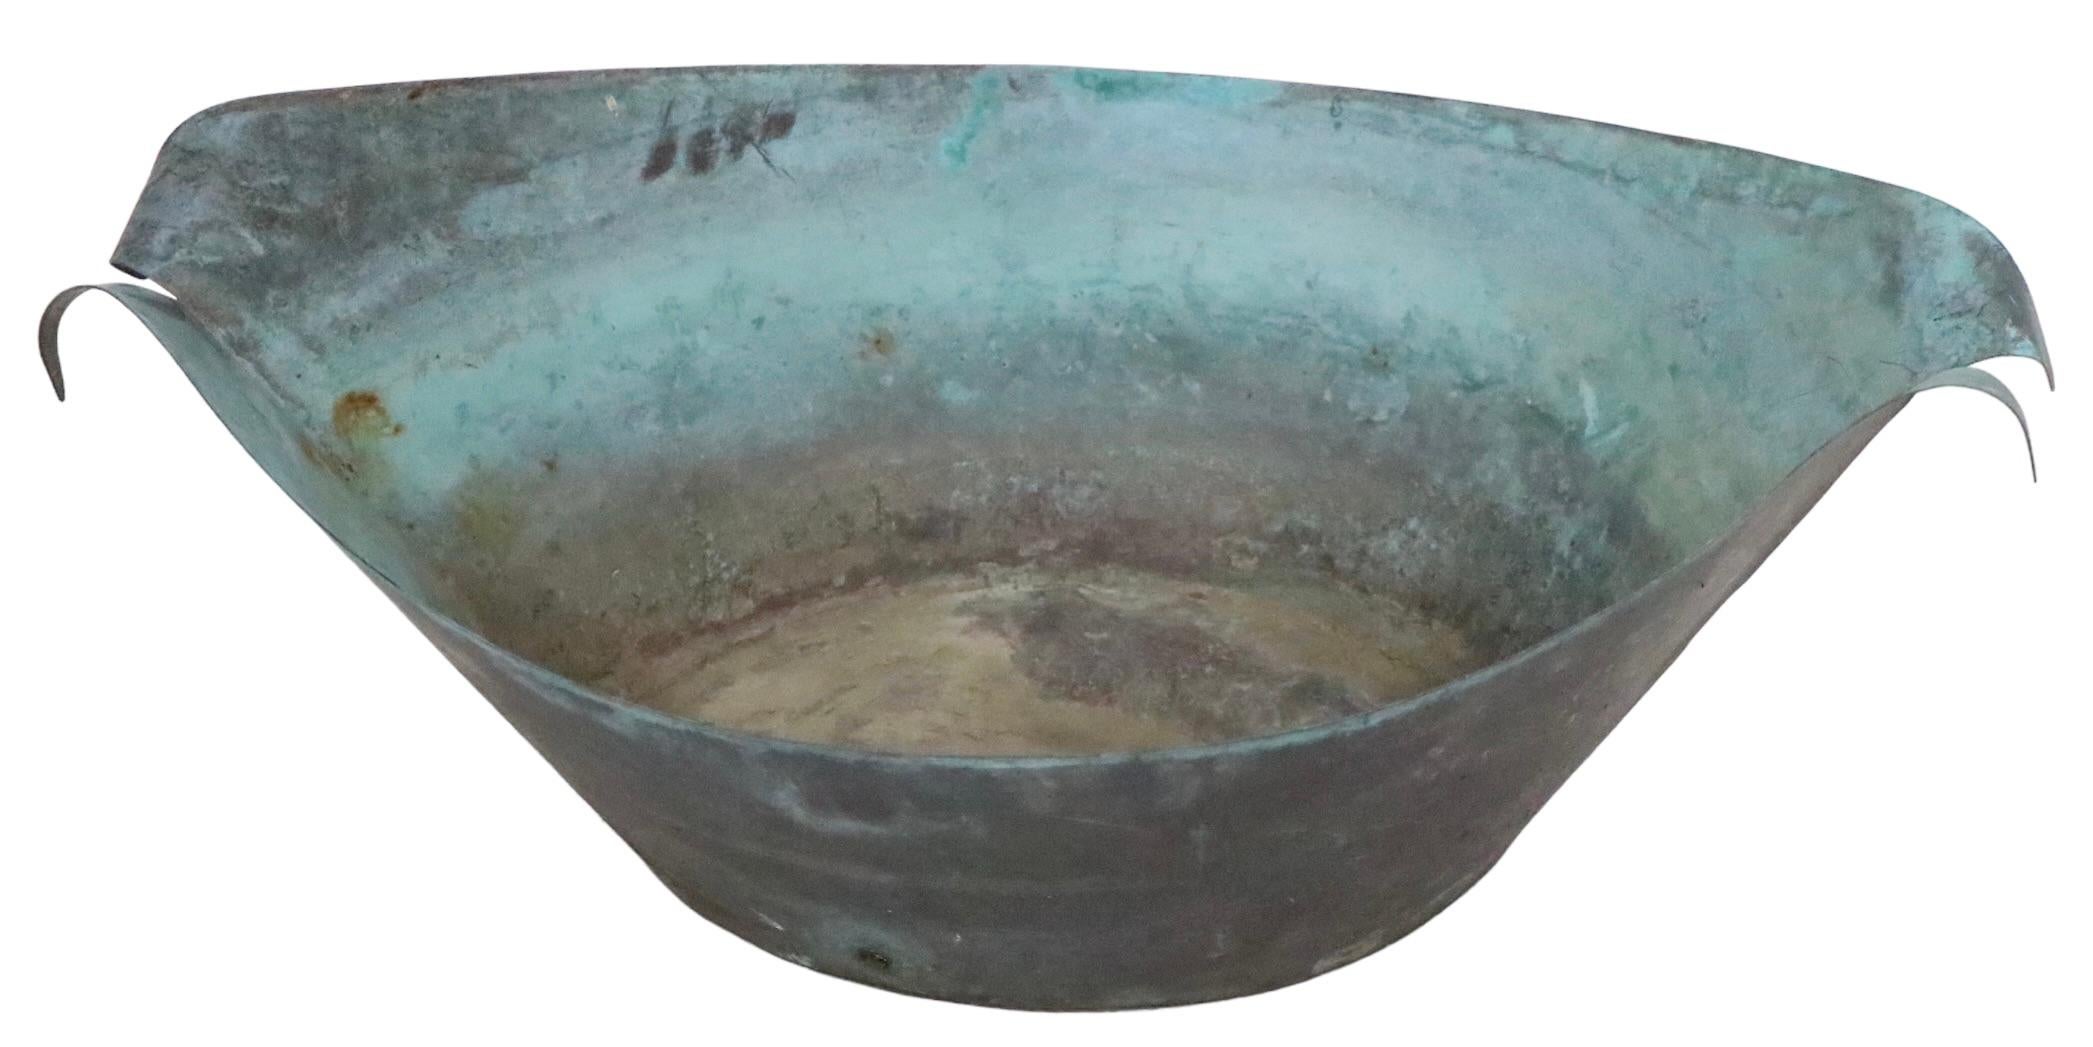 Exceptional stylized organic modern garden fountain, executed in hand formed copper, which has achieved a wonderful patinated verdigris finish. 
The fountain consists of an oval basin, from which a plant like center extends vertically. The piece is